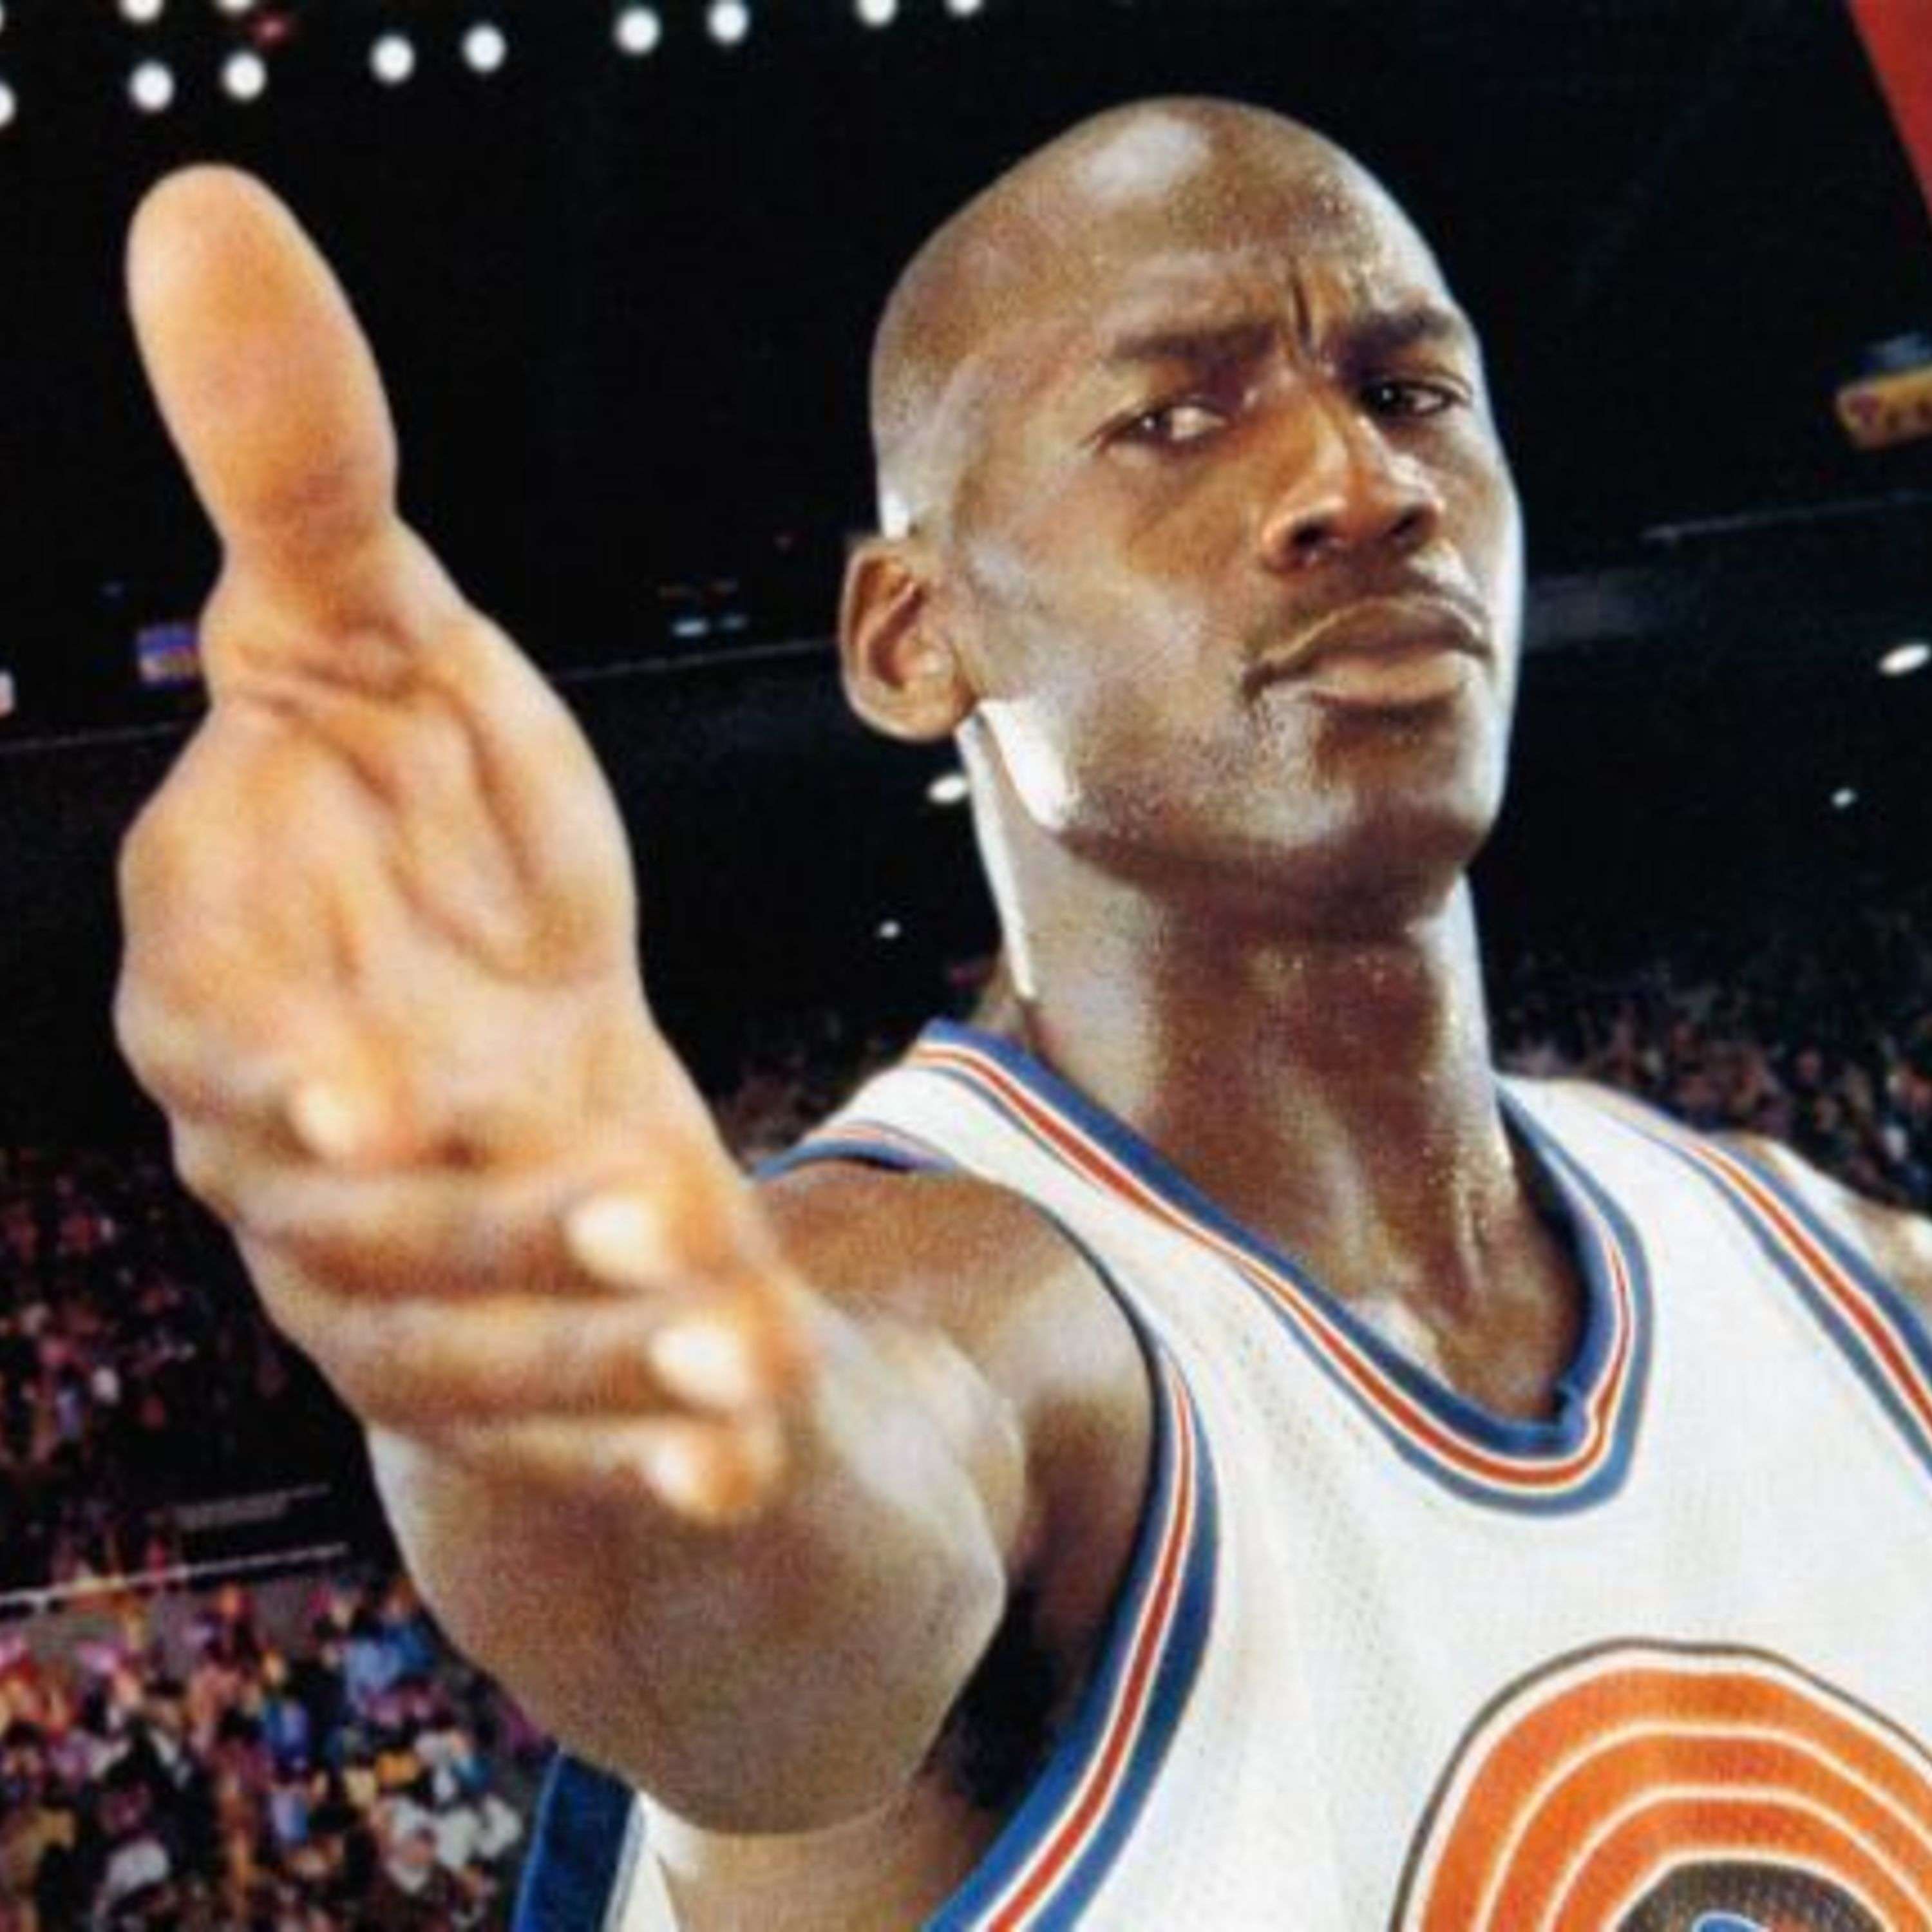 Space Jam, Never Rarely Sometimes Always, The Assistant (Social Distancing Cinema #2)